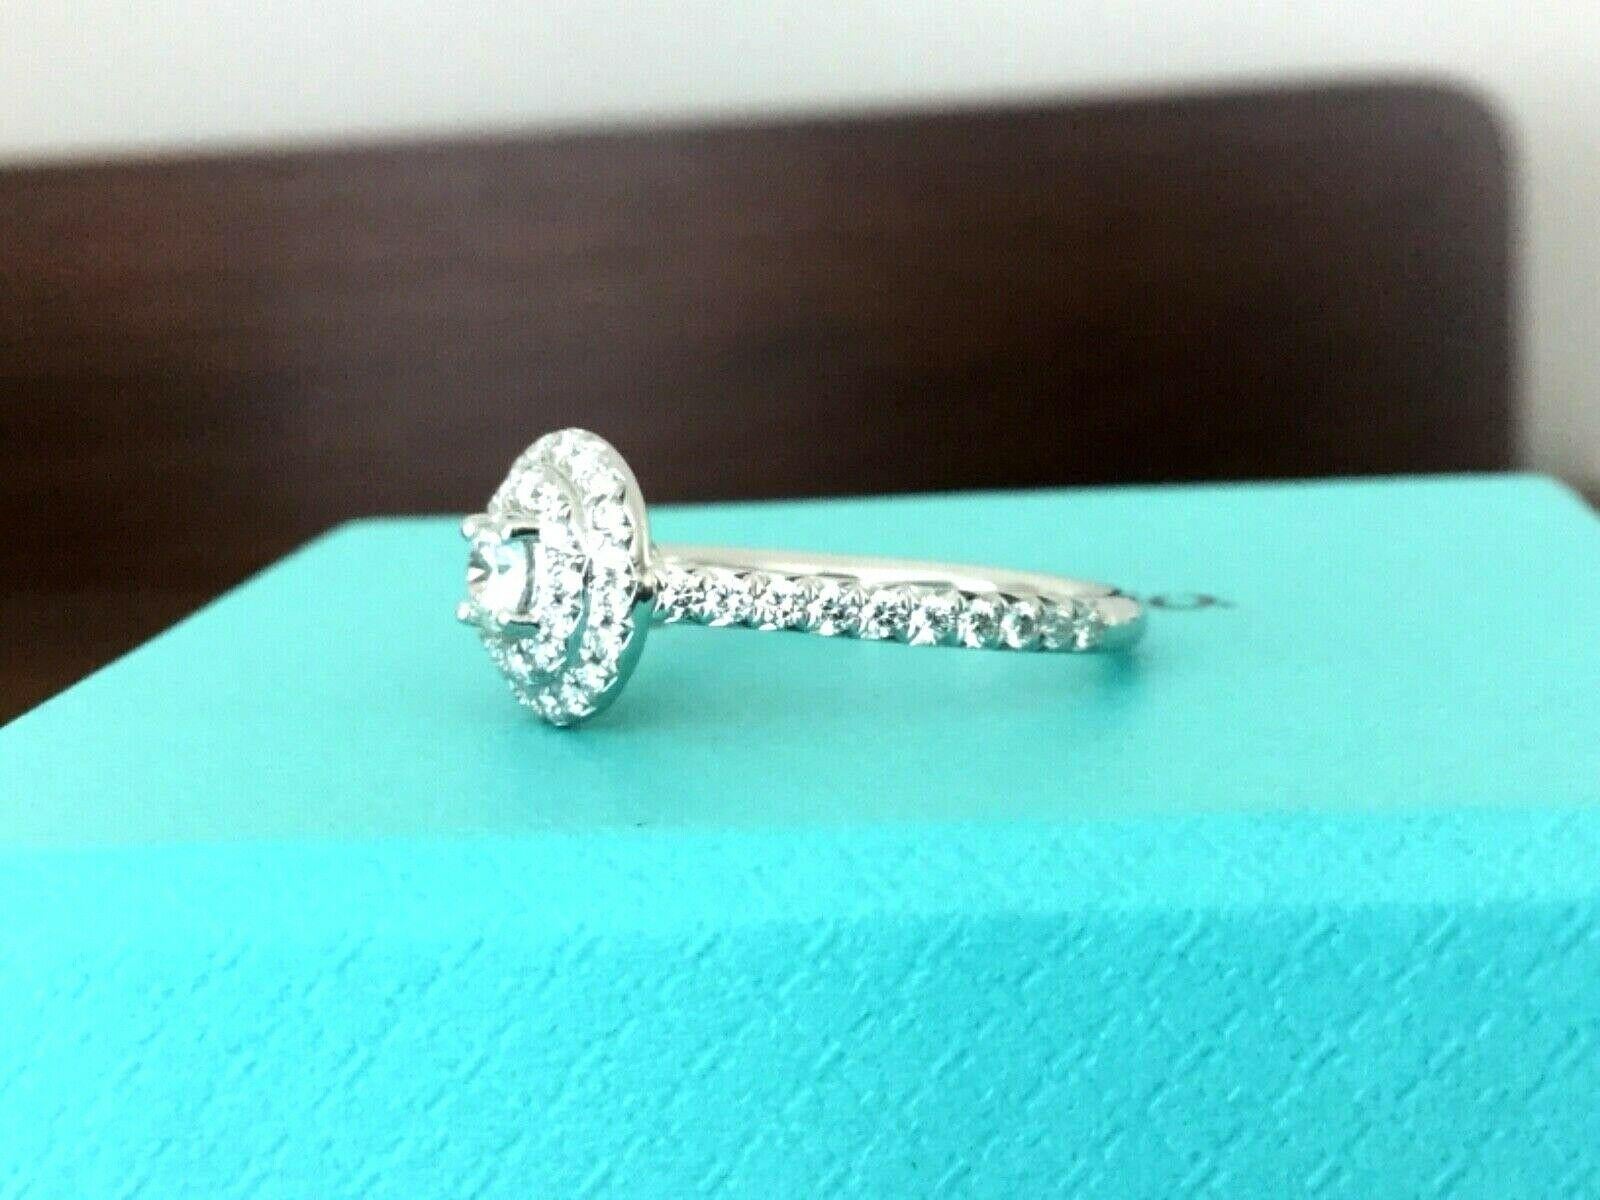 Tiffany & Co. Platinum Diamond Soleste Engagement Ring .43 Total Carat Weight In Excellent Condition For Sale In Middletown, DE